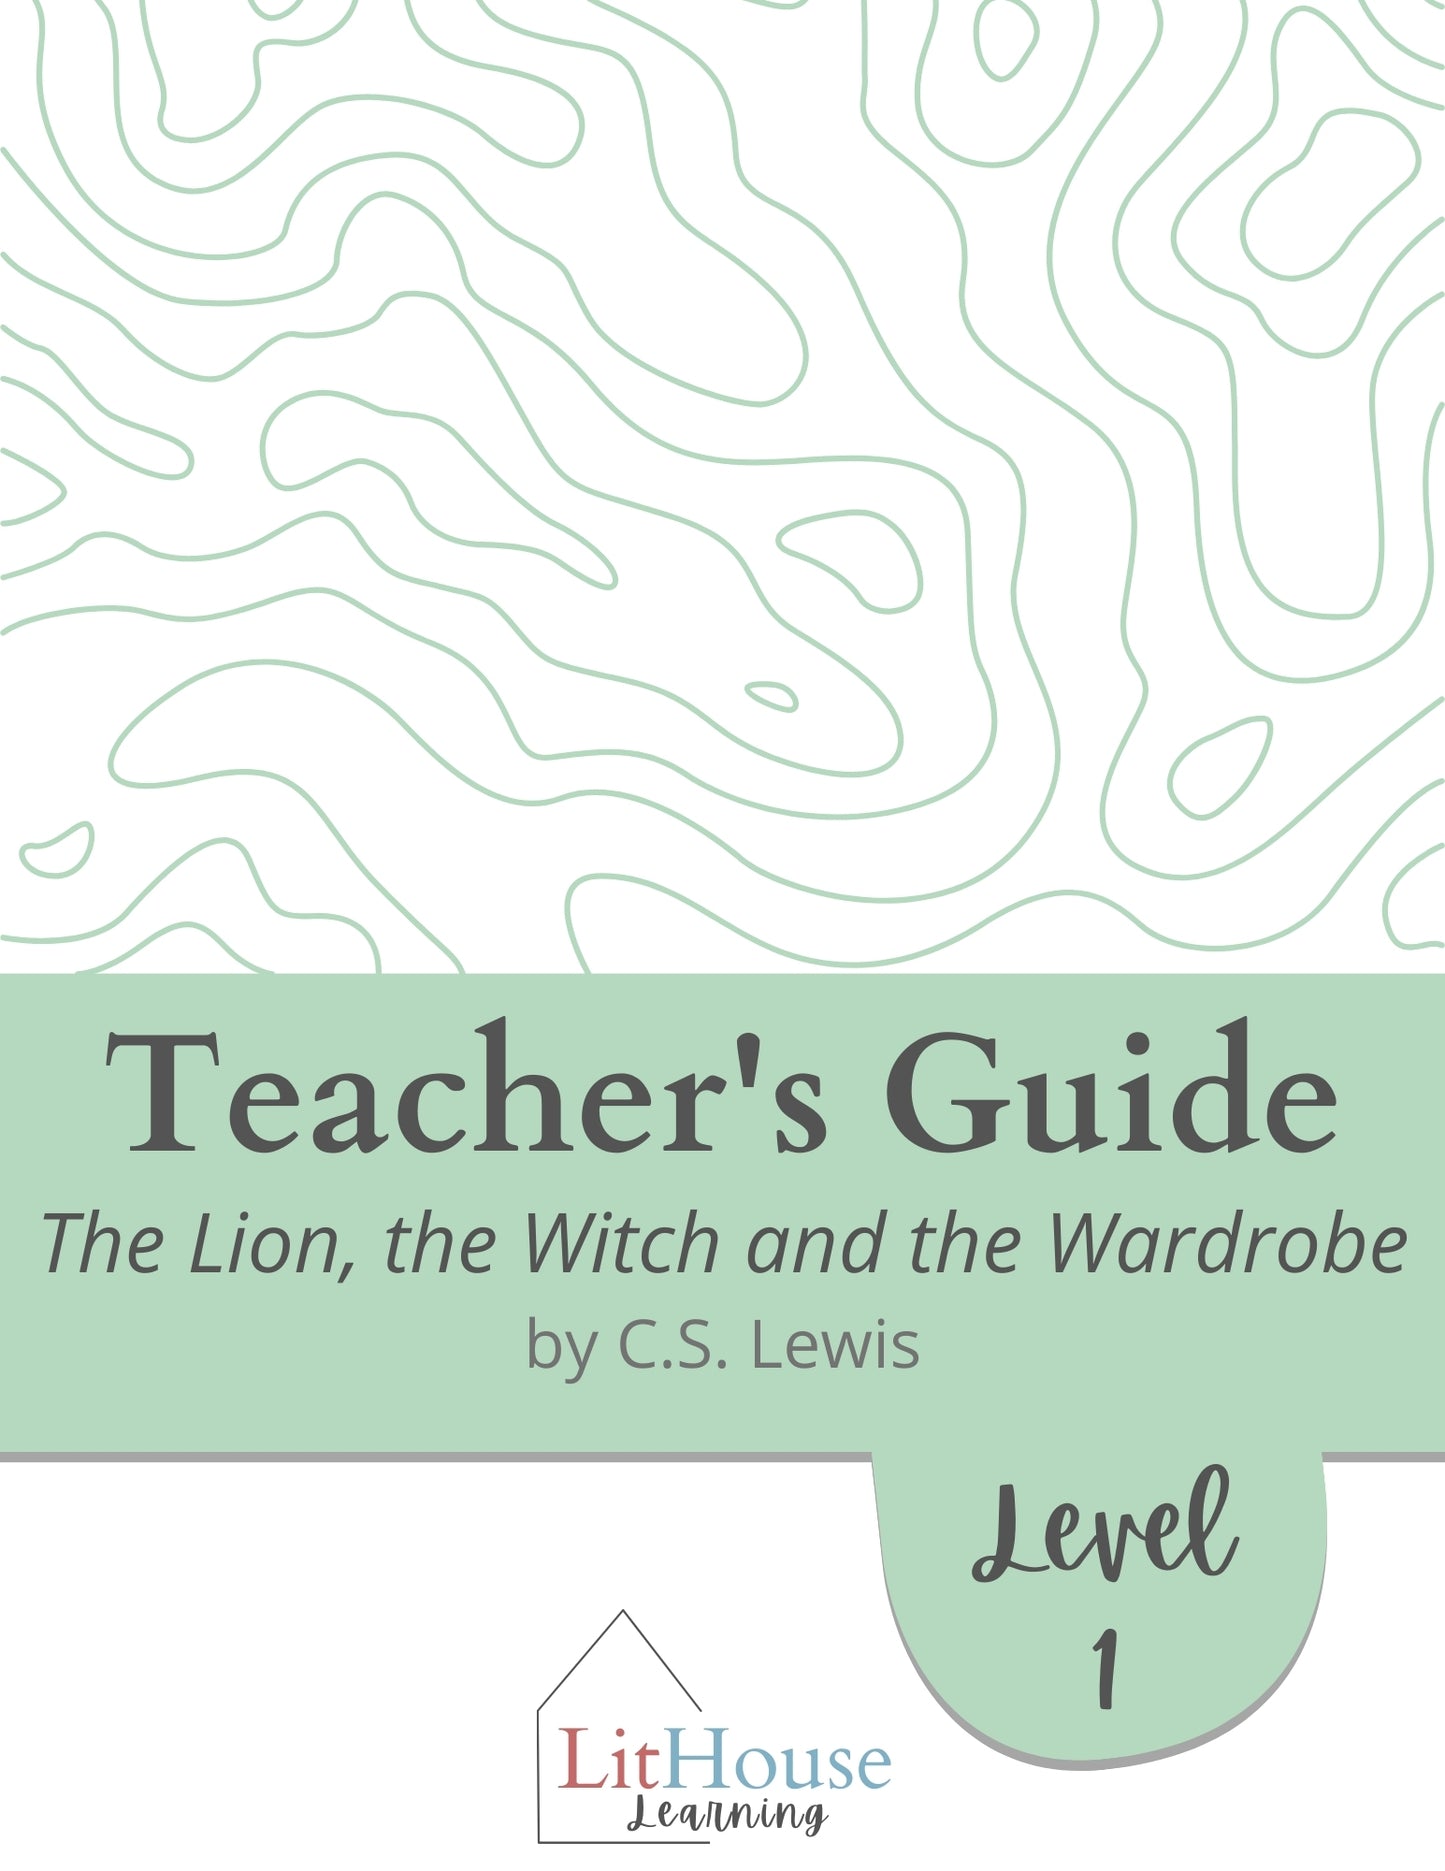 The Lion, the Witch and the Wardrobe Novel Study